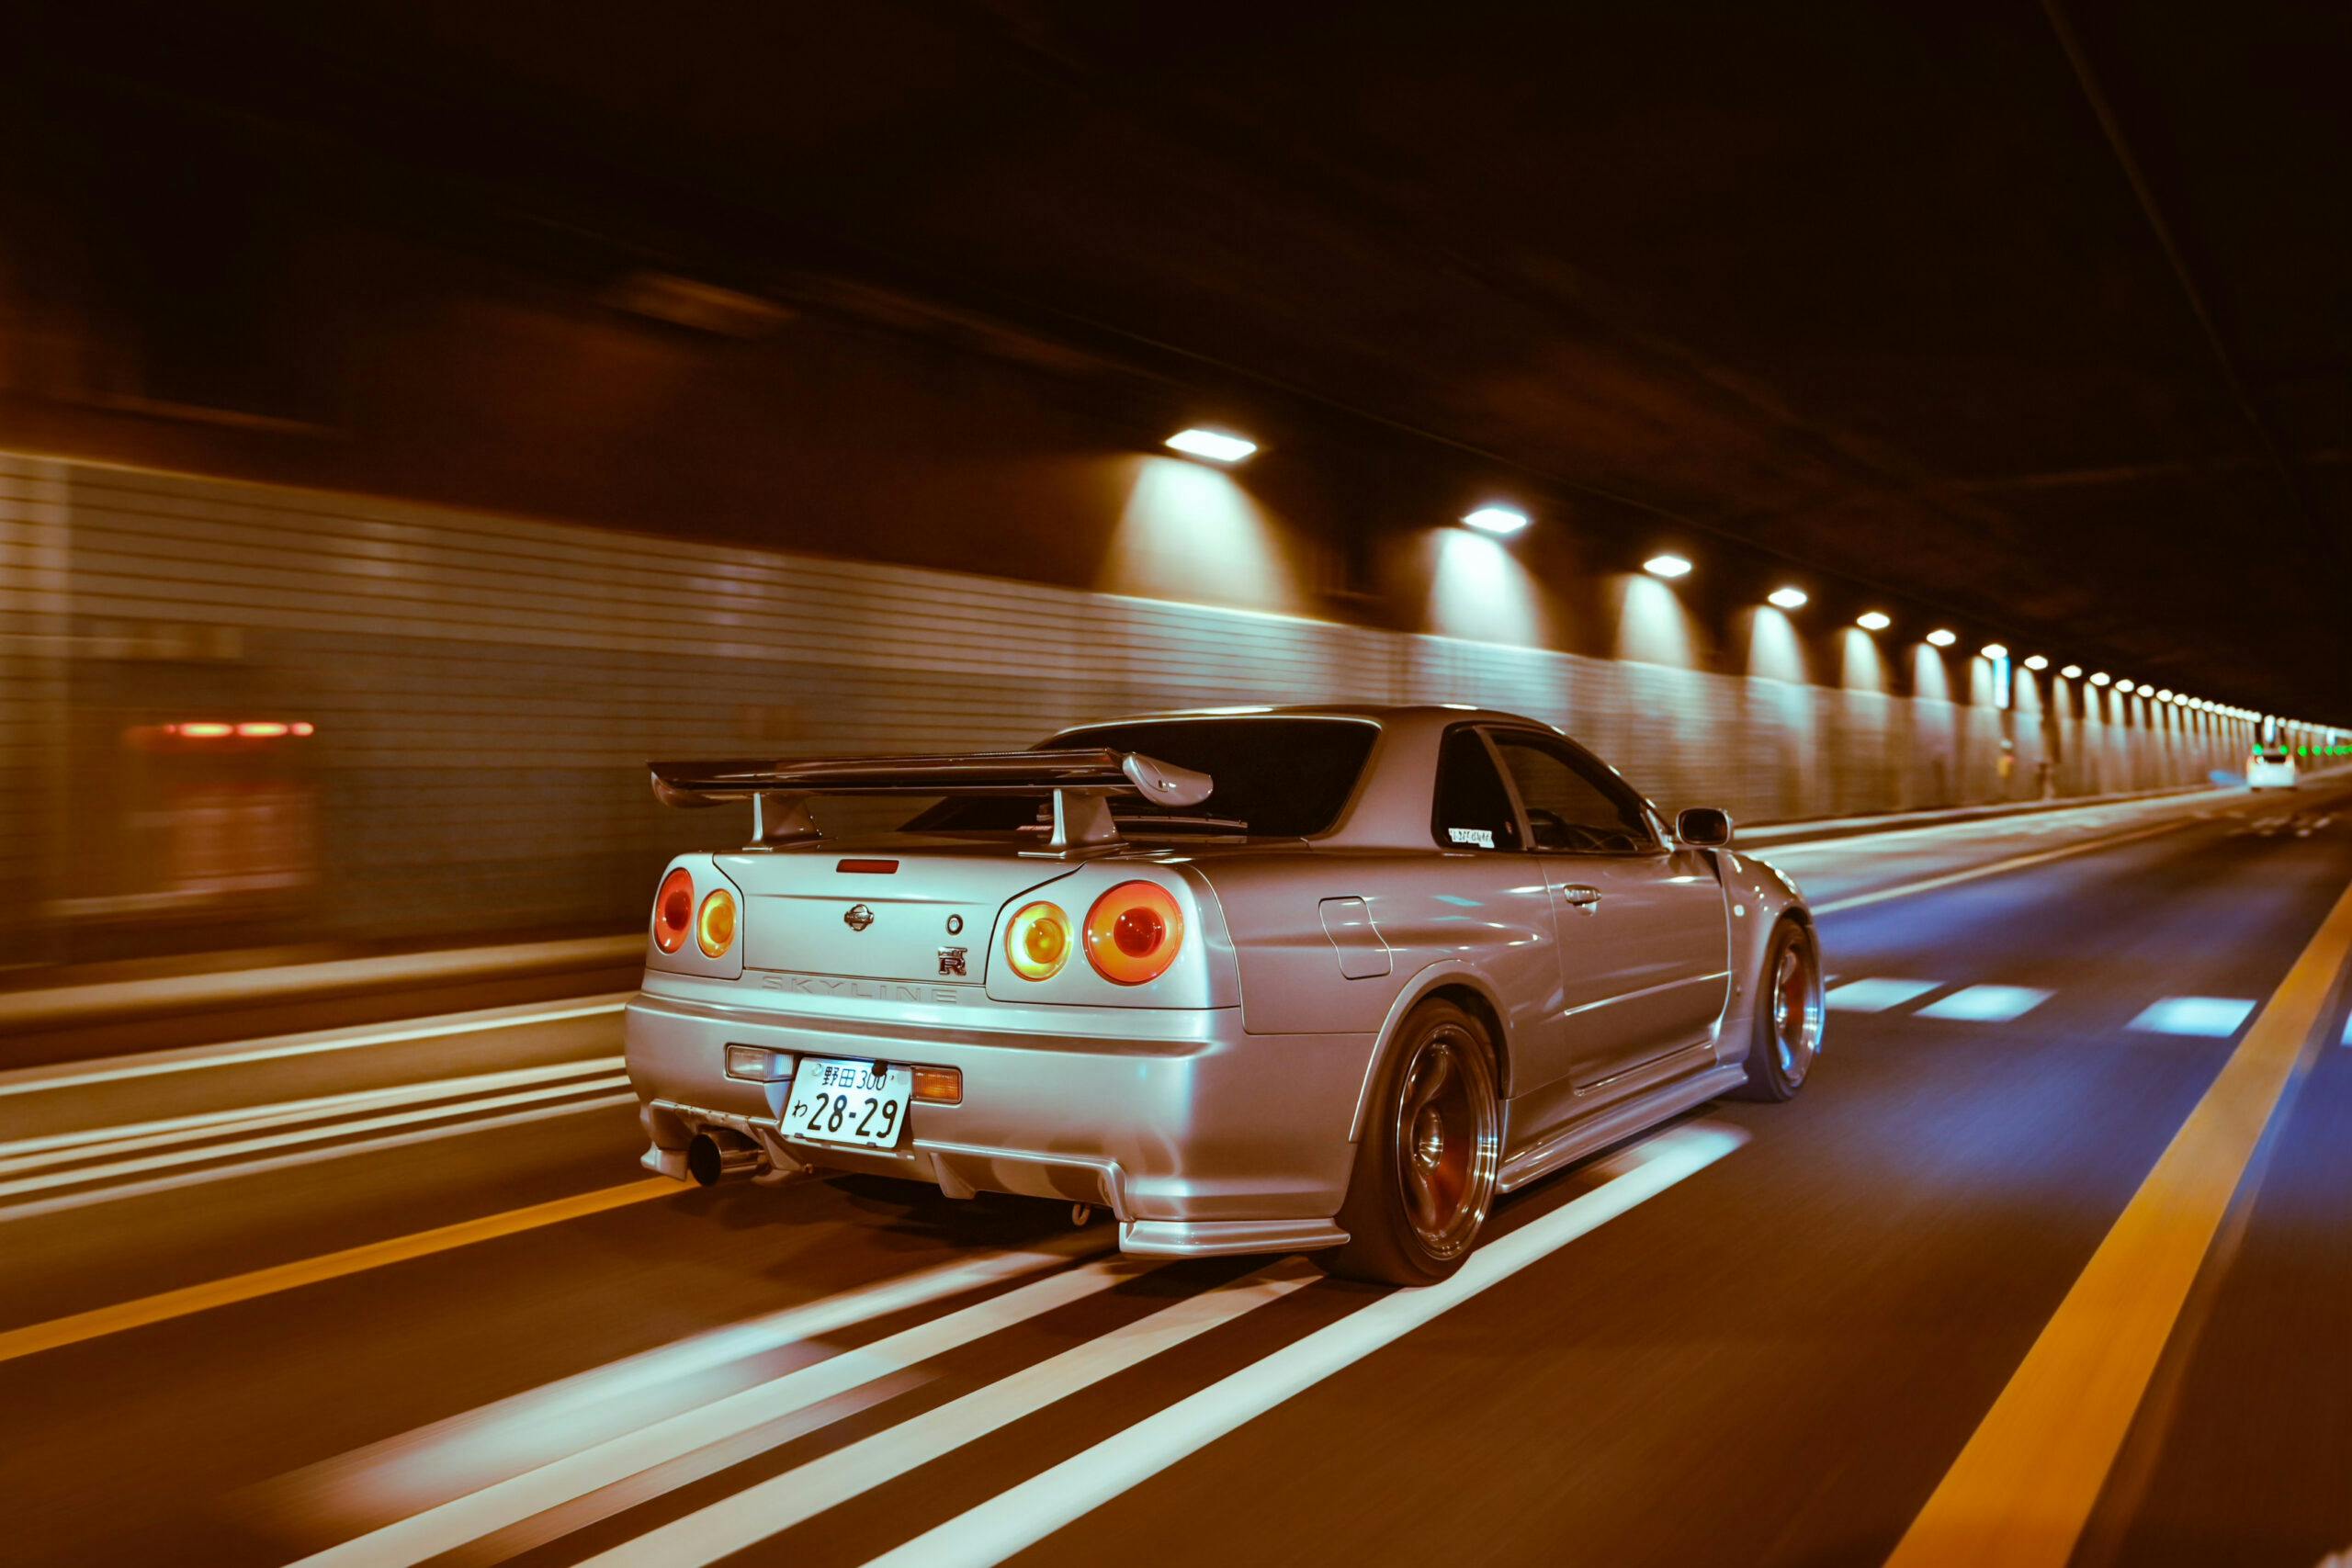 Is THIS the New Nissan Skyline GT-R? – Ideal